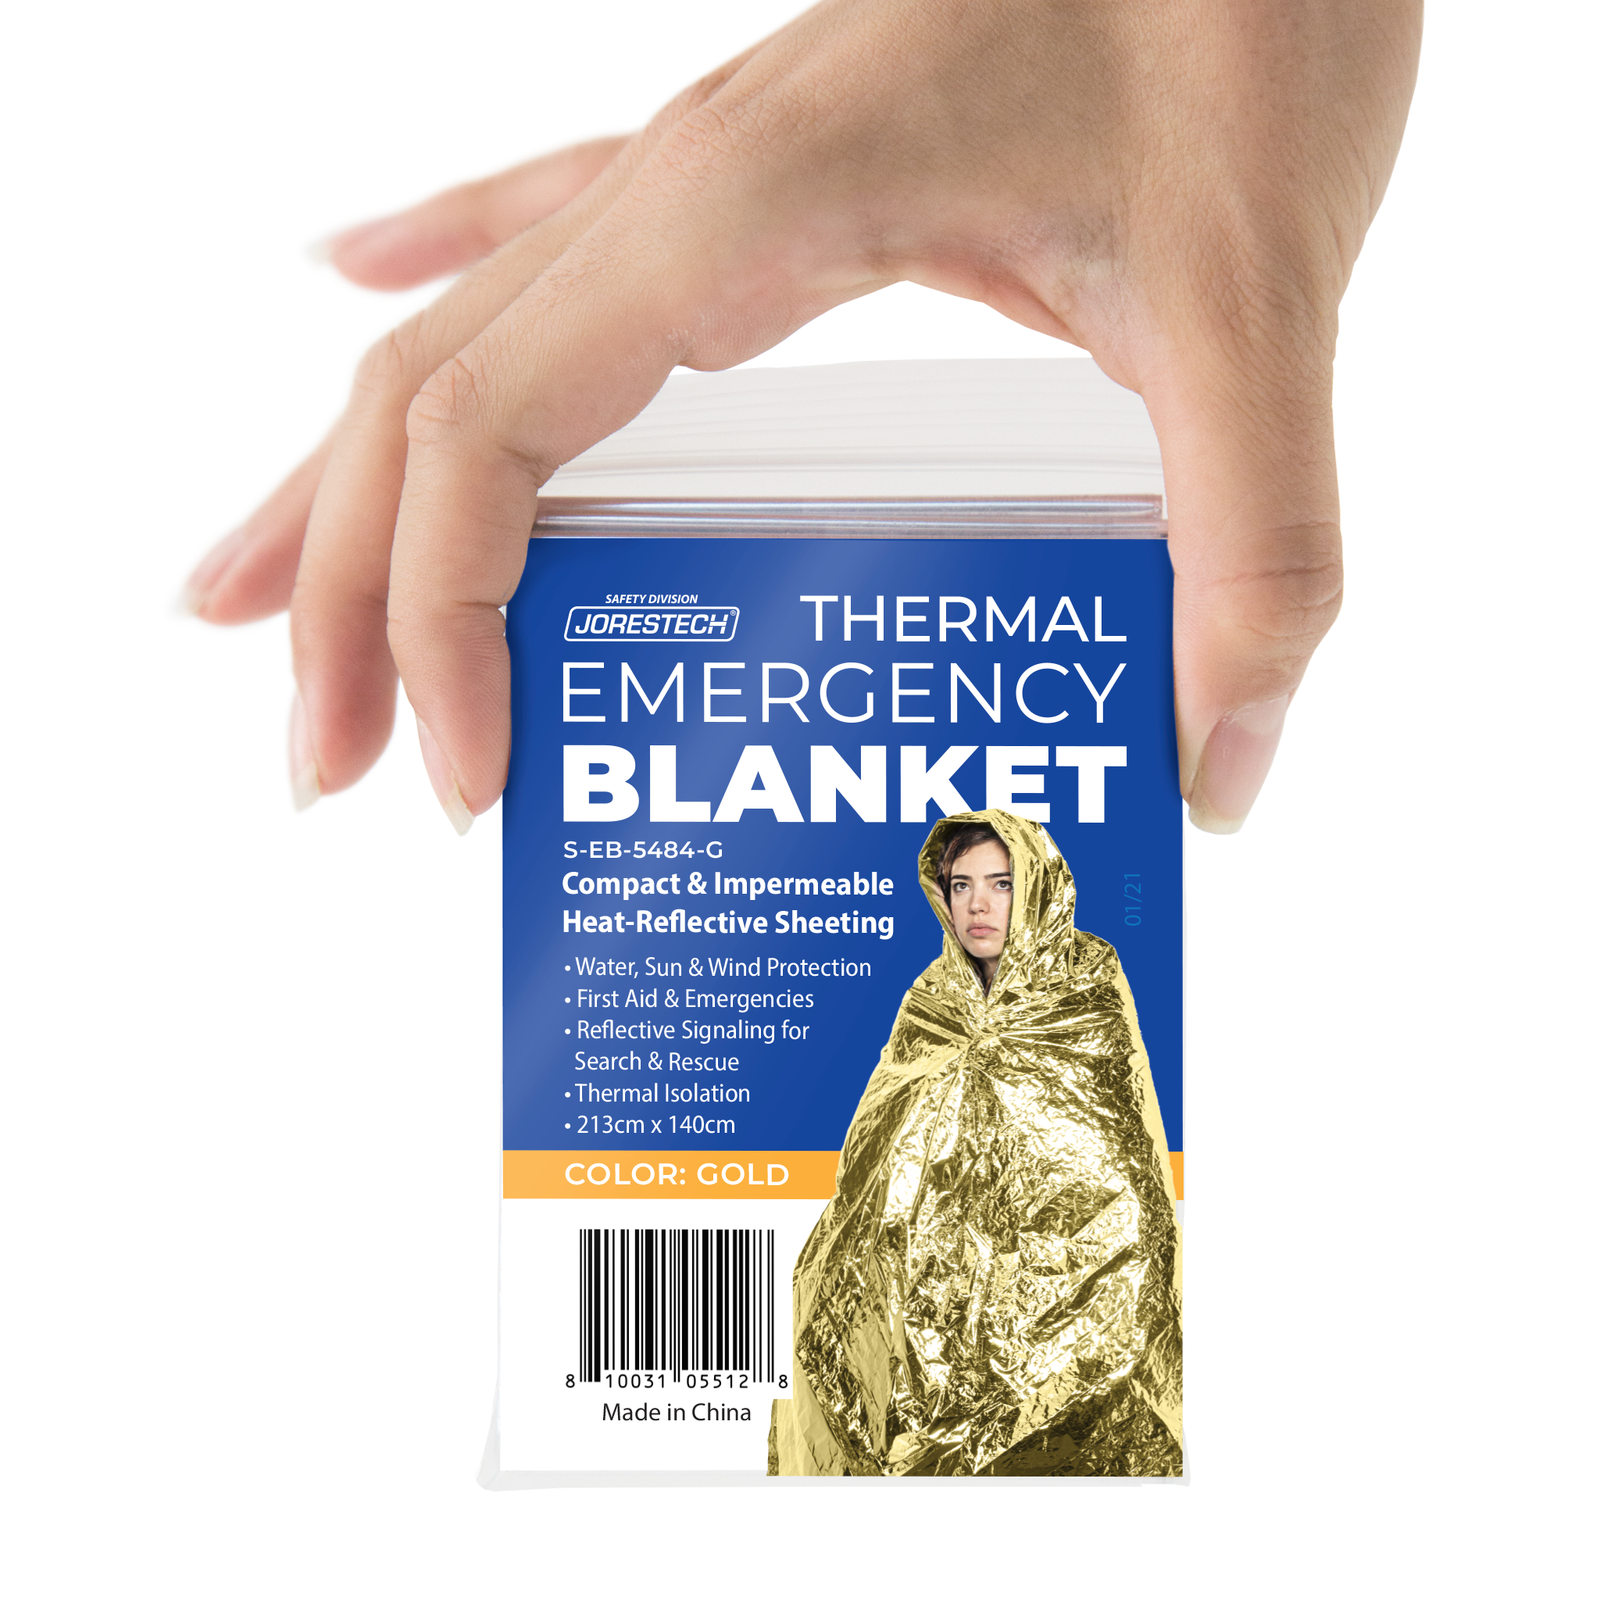 Hand of a person holding one thermafoil gold and silver compact emergency blanket in its zip-lock carry bag